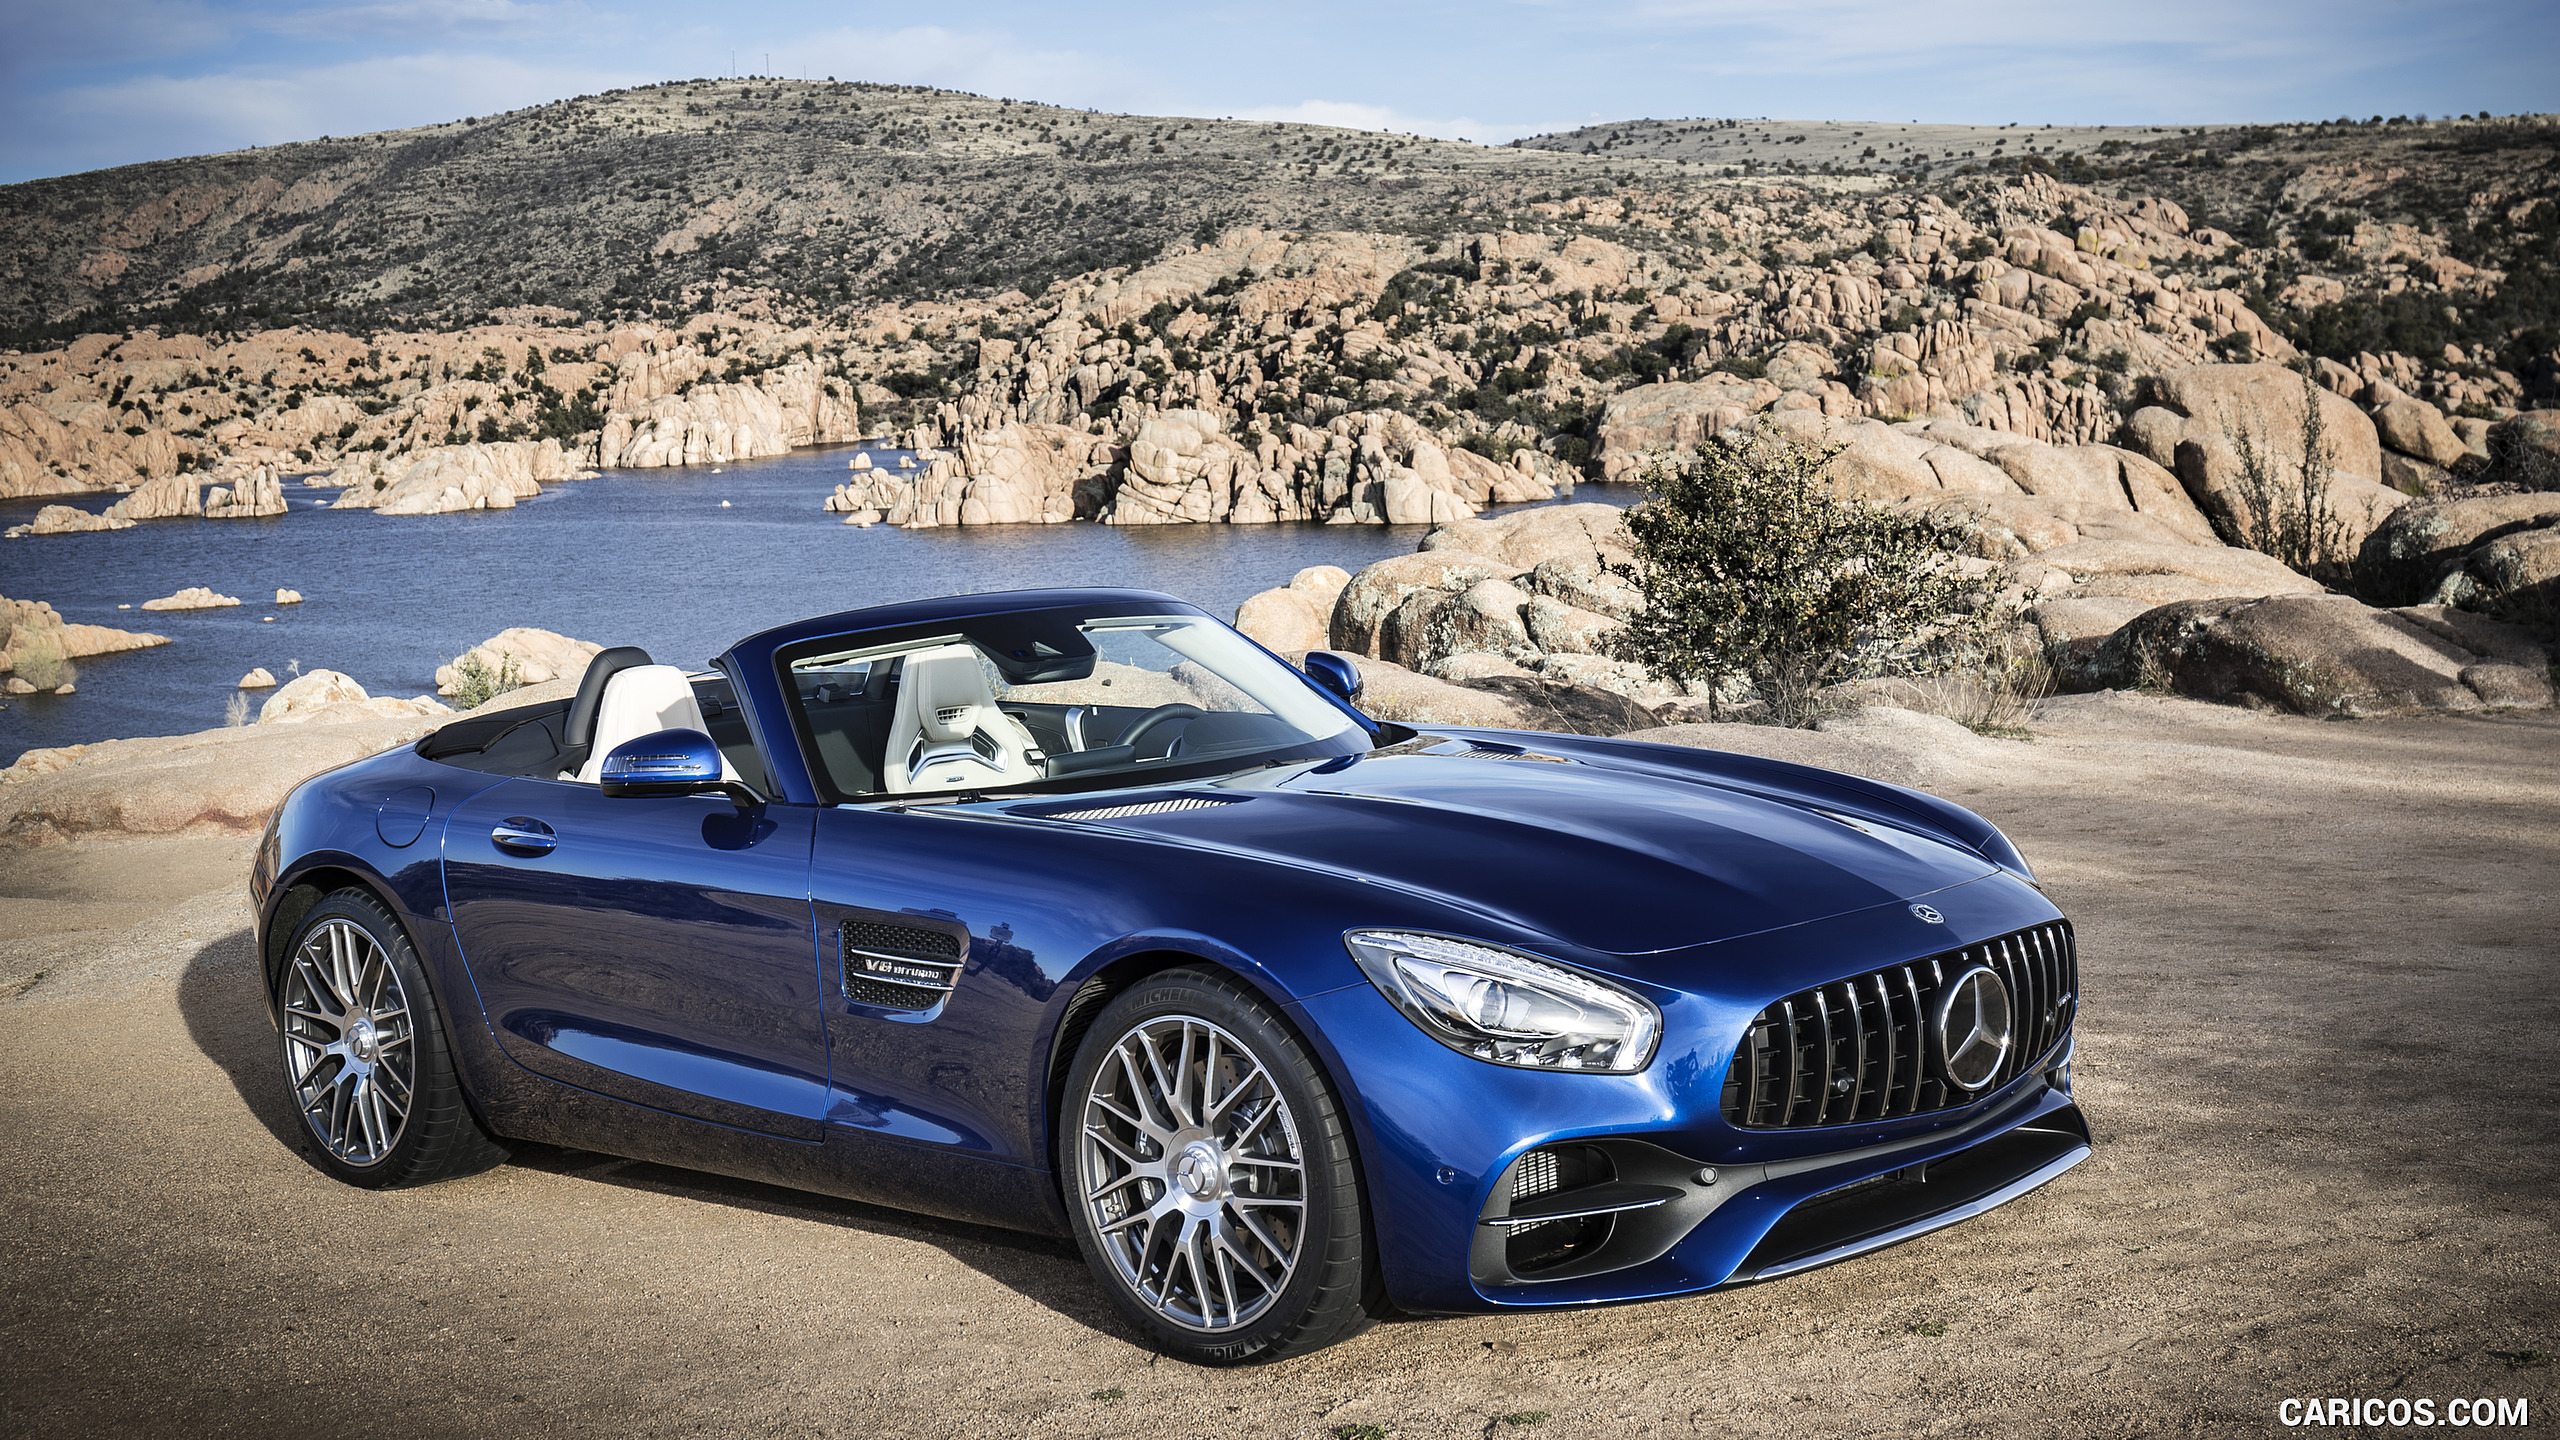 2018 Mercedes-AMG GT Roadster - Front Three-Quarter, #127 of 350